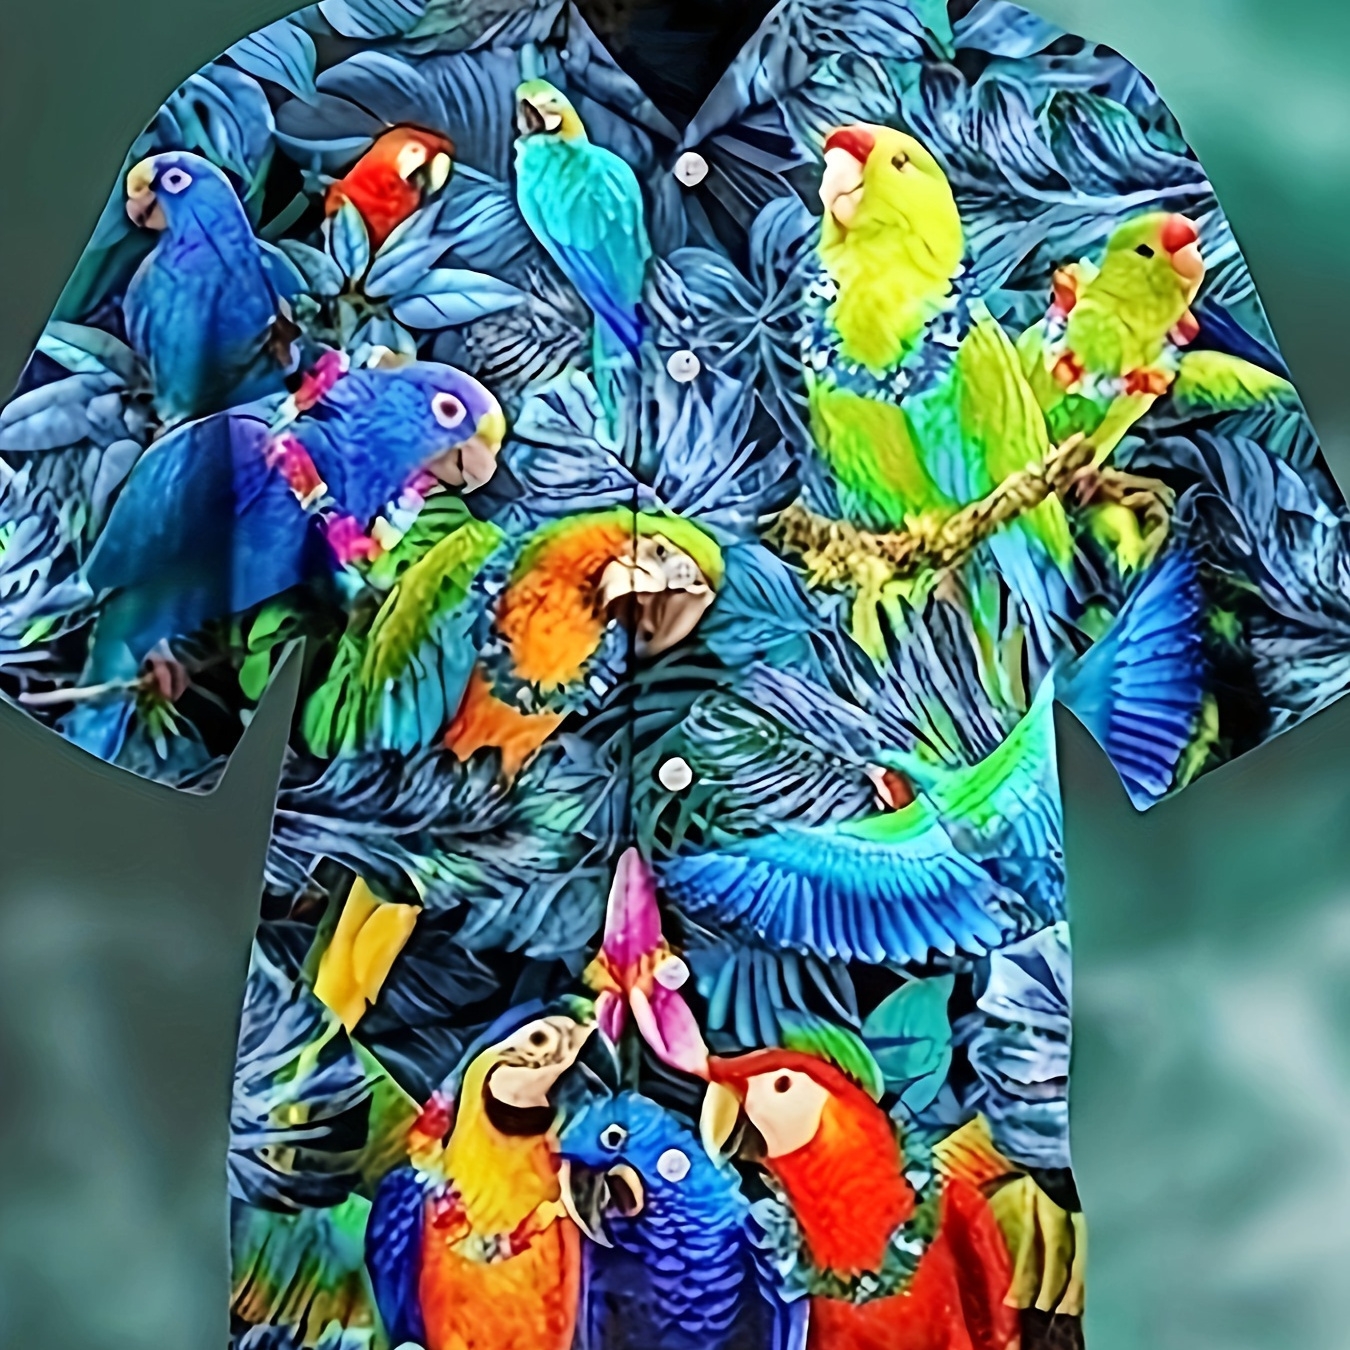 

Plus Size Men's Colorful 3d Parrot Graphic Print Shirt For Summer Beach Holiday, Hawaiian Style Short Sleeve Shirt